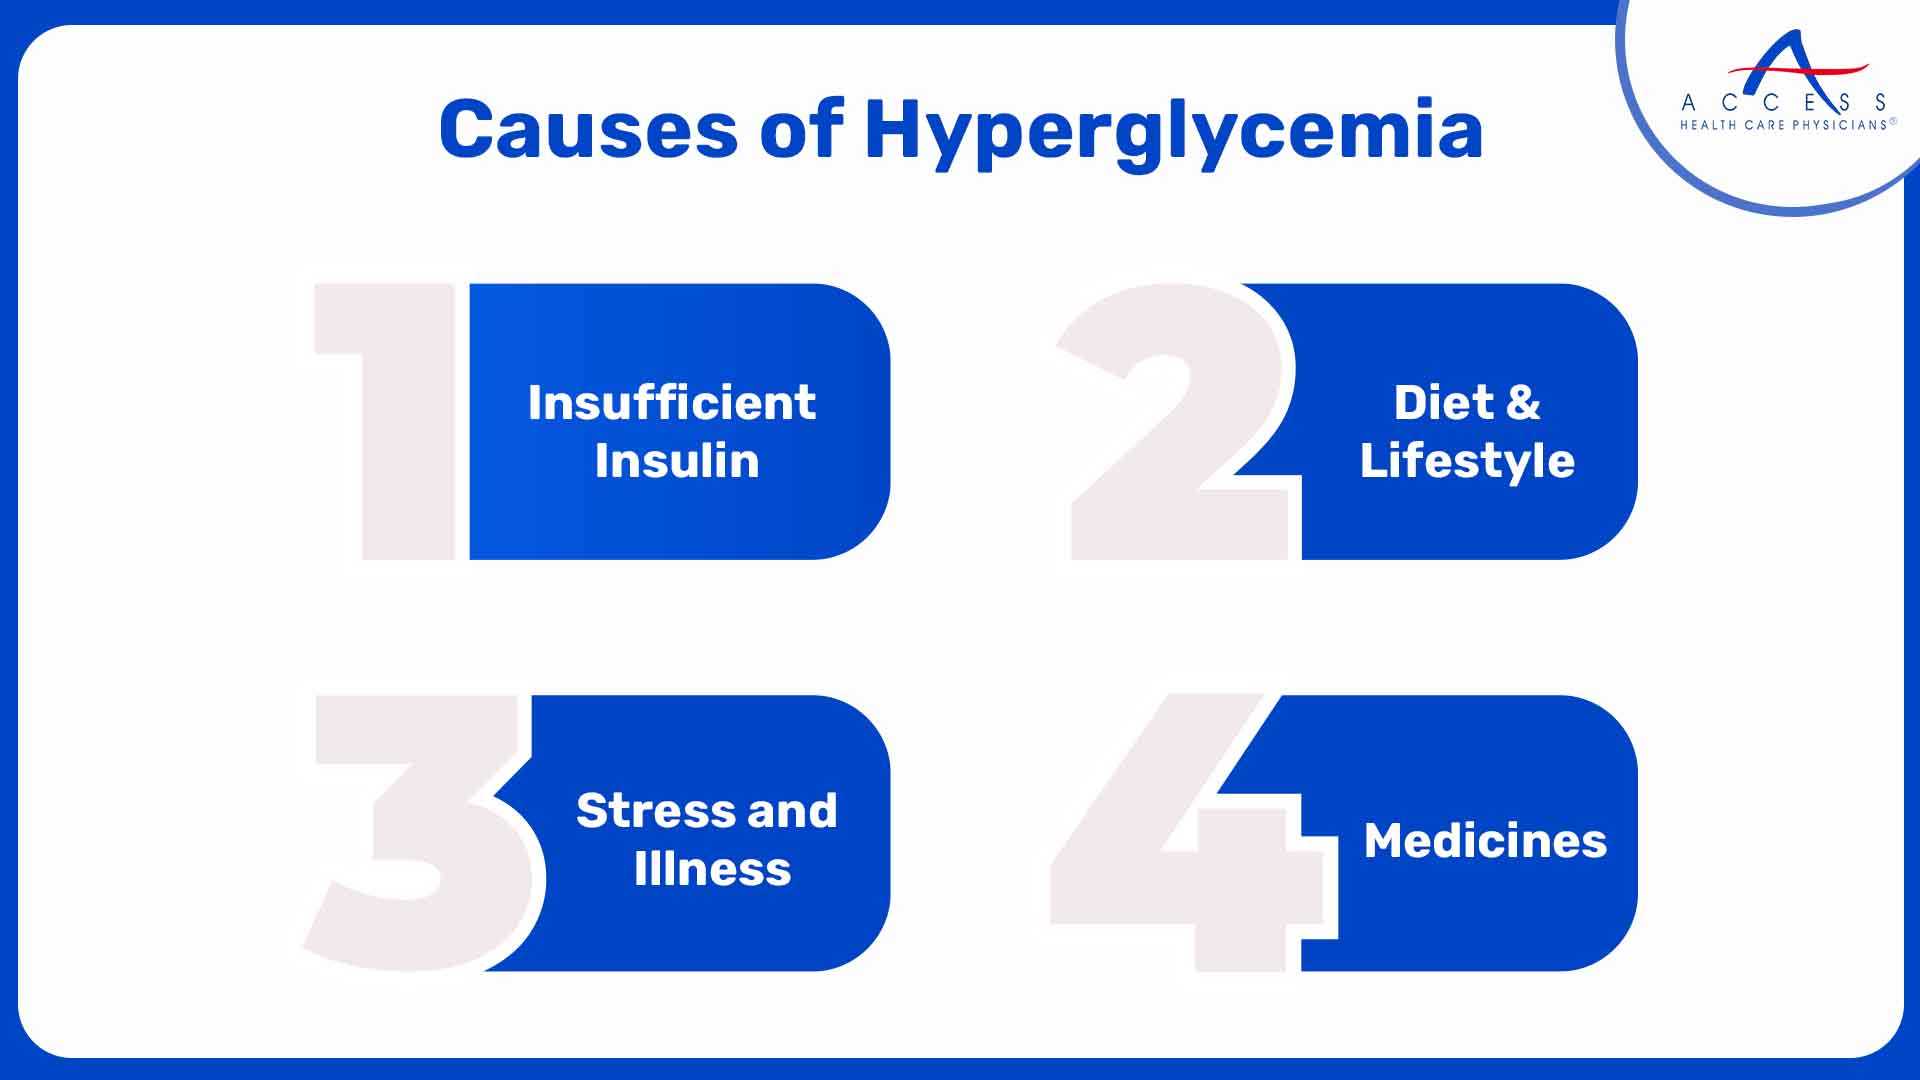 Causes of Hyperglycemia